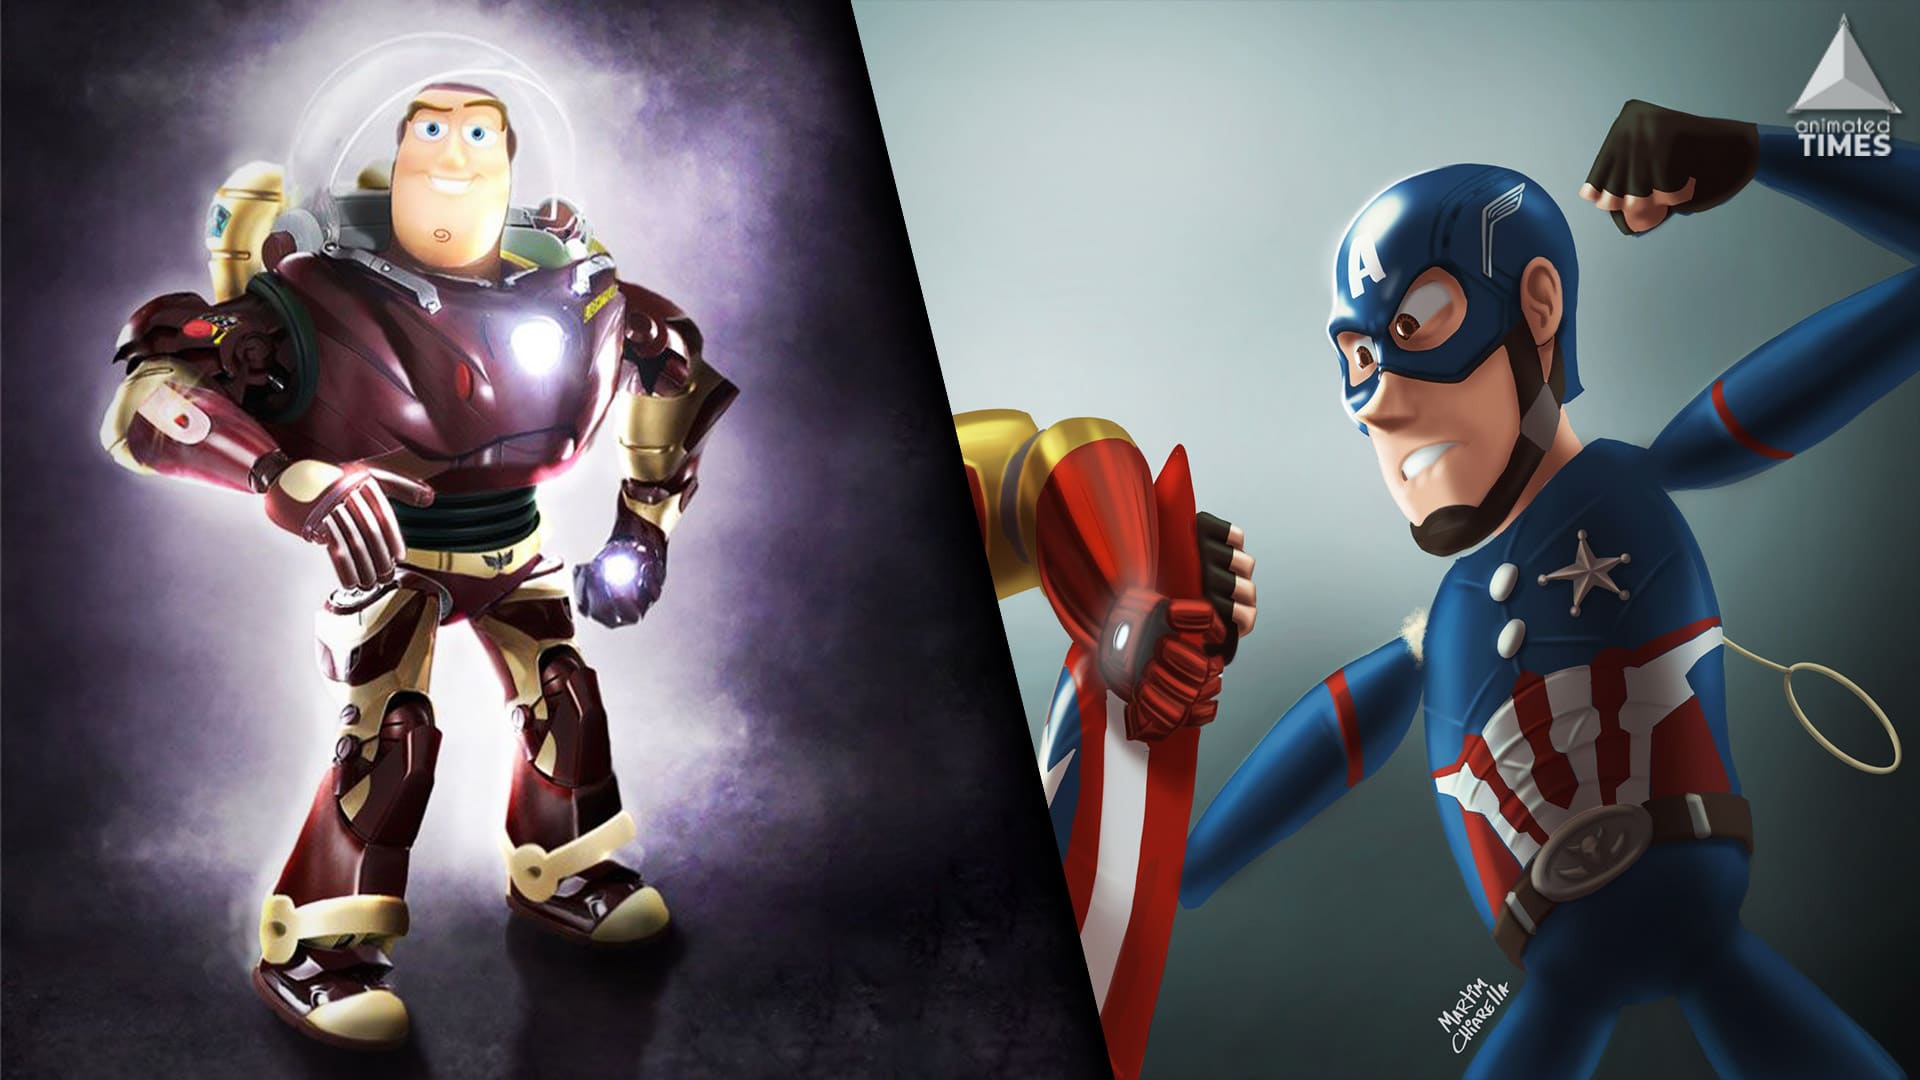 From Disney Characters to Marvel’s Avengers – Creative Crossovers